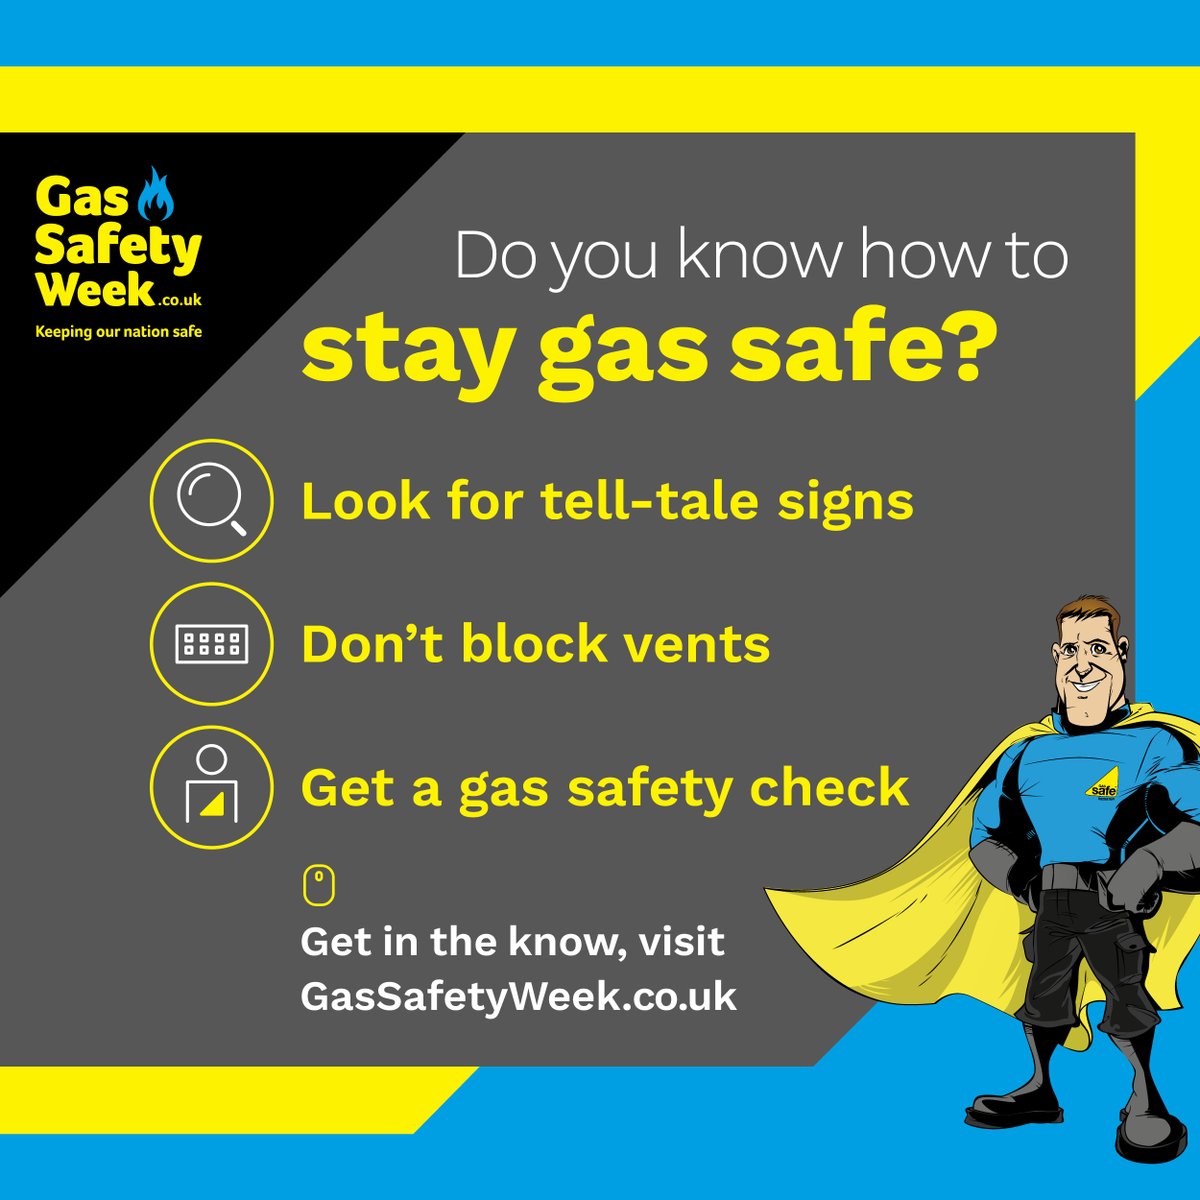 #GasSafetyWeek may be over, but it’s always good to be aware of how to keep you and your loved ones safe

✅Get a gas safety check on your appliances
💨Don't block air vents
🔥Look for lazy yellow hob flames or soot marks

Find out more at GasSafetyWeek.co.uk
#GSW23